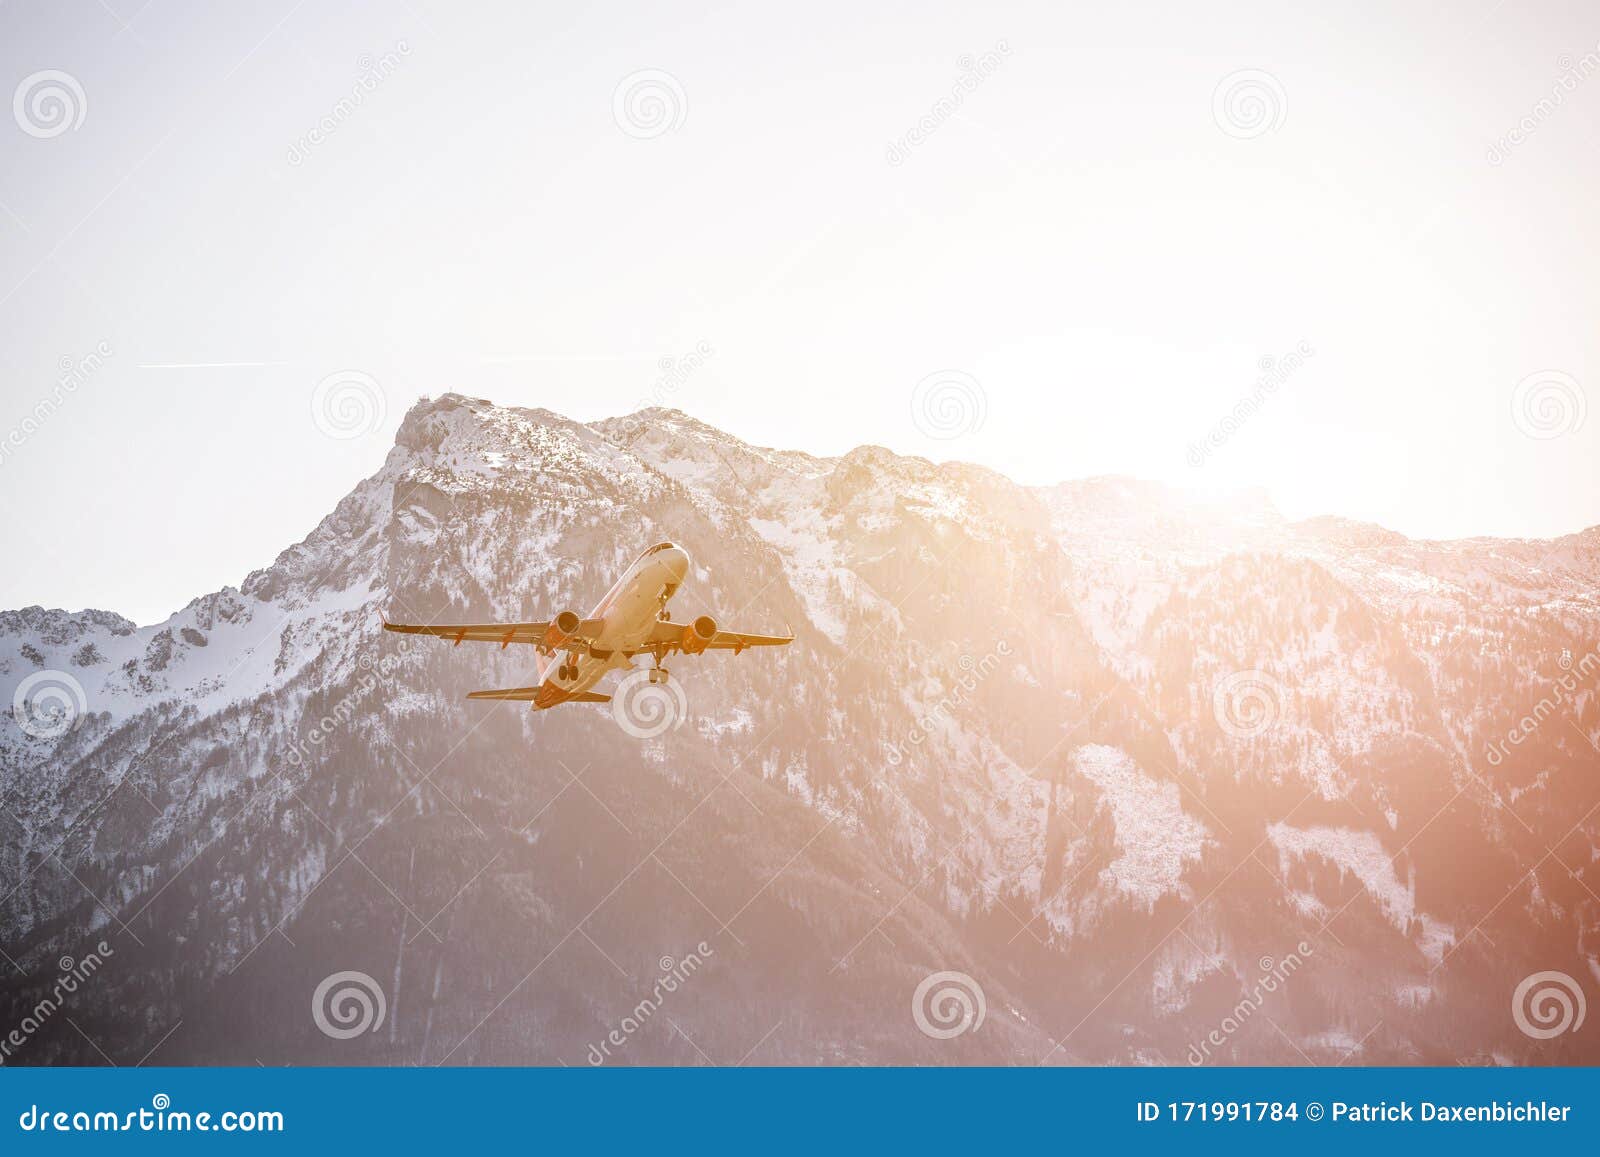 airplane scenery:  take off from airport, mountain range in the alps. travel by air, transportation